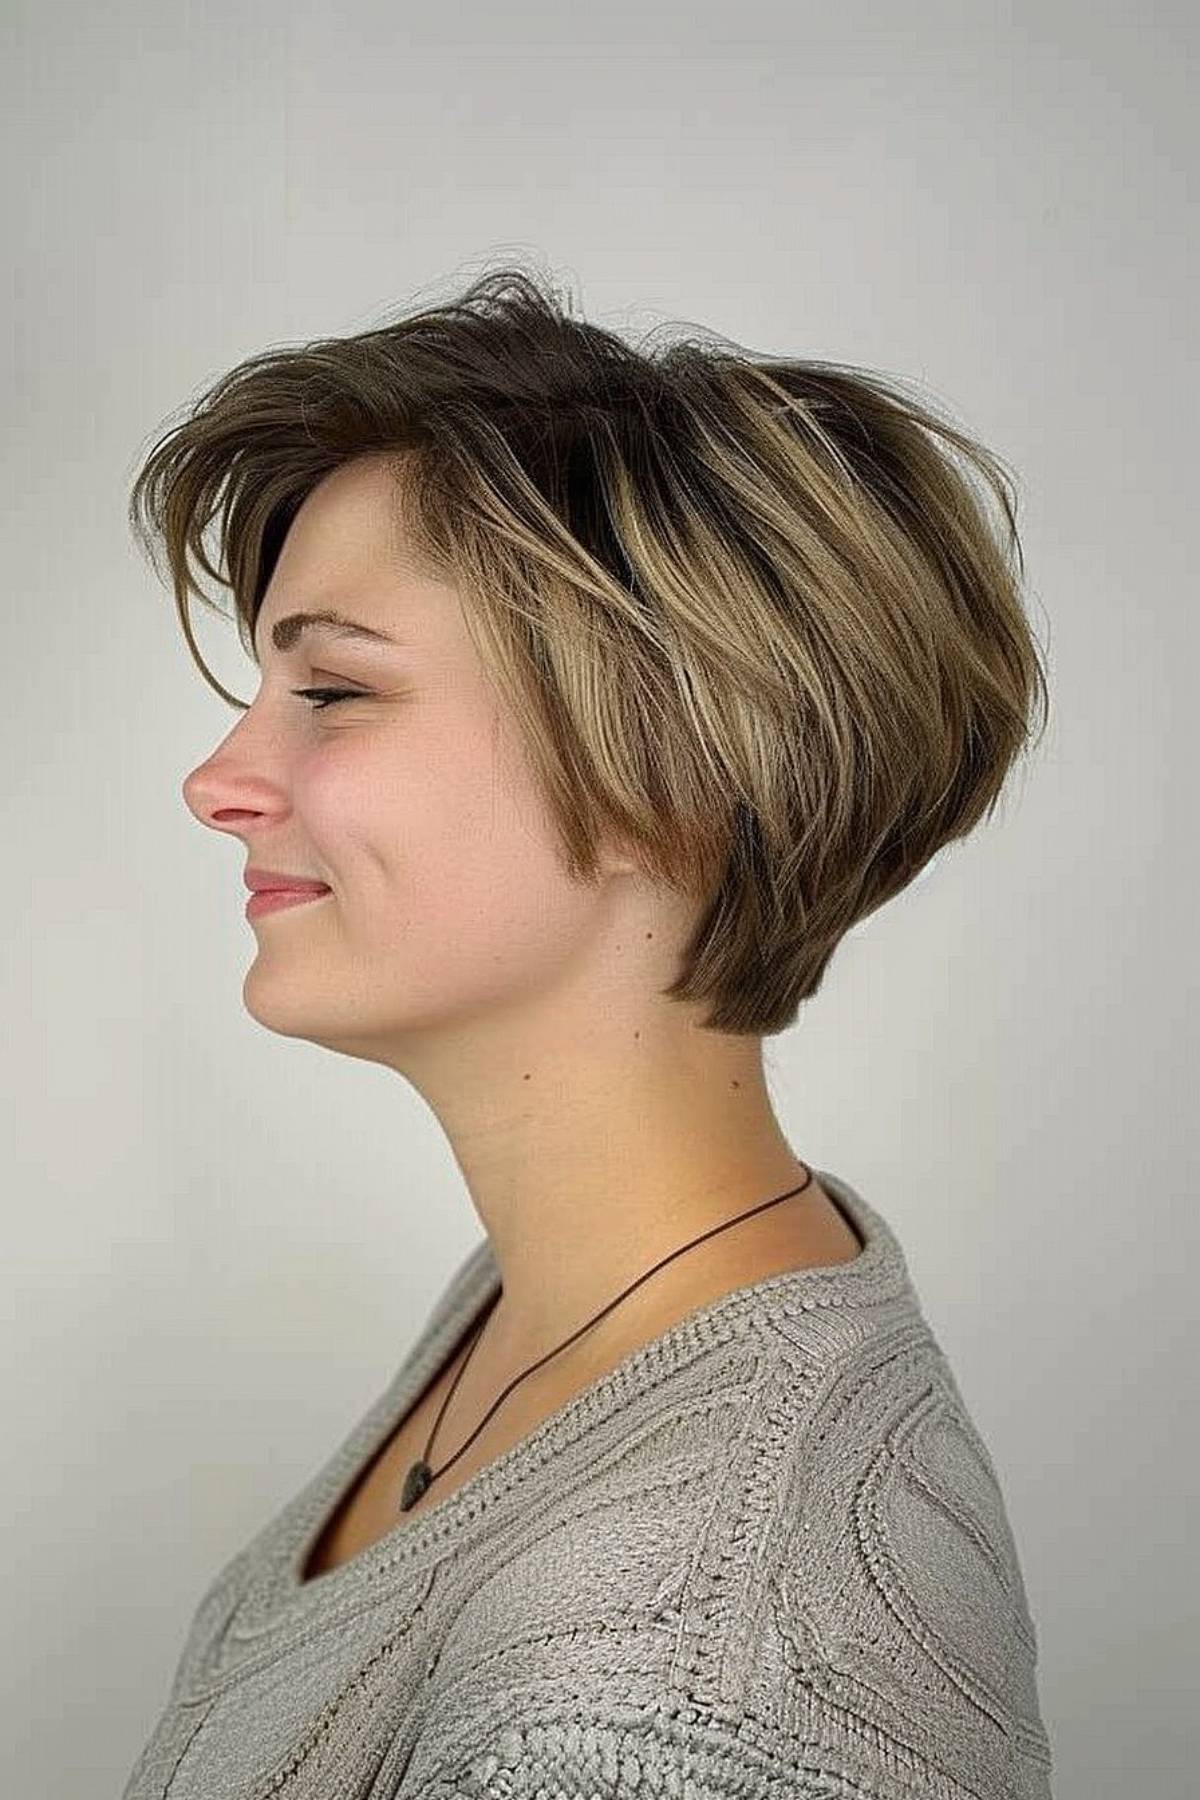 Profile of a woman transitioning from a short stacked bob to pixie-like layers that add depth and volume.